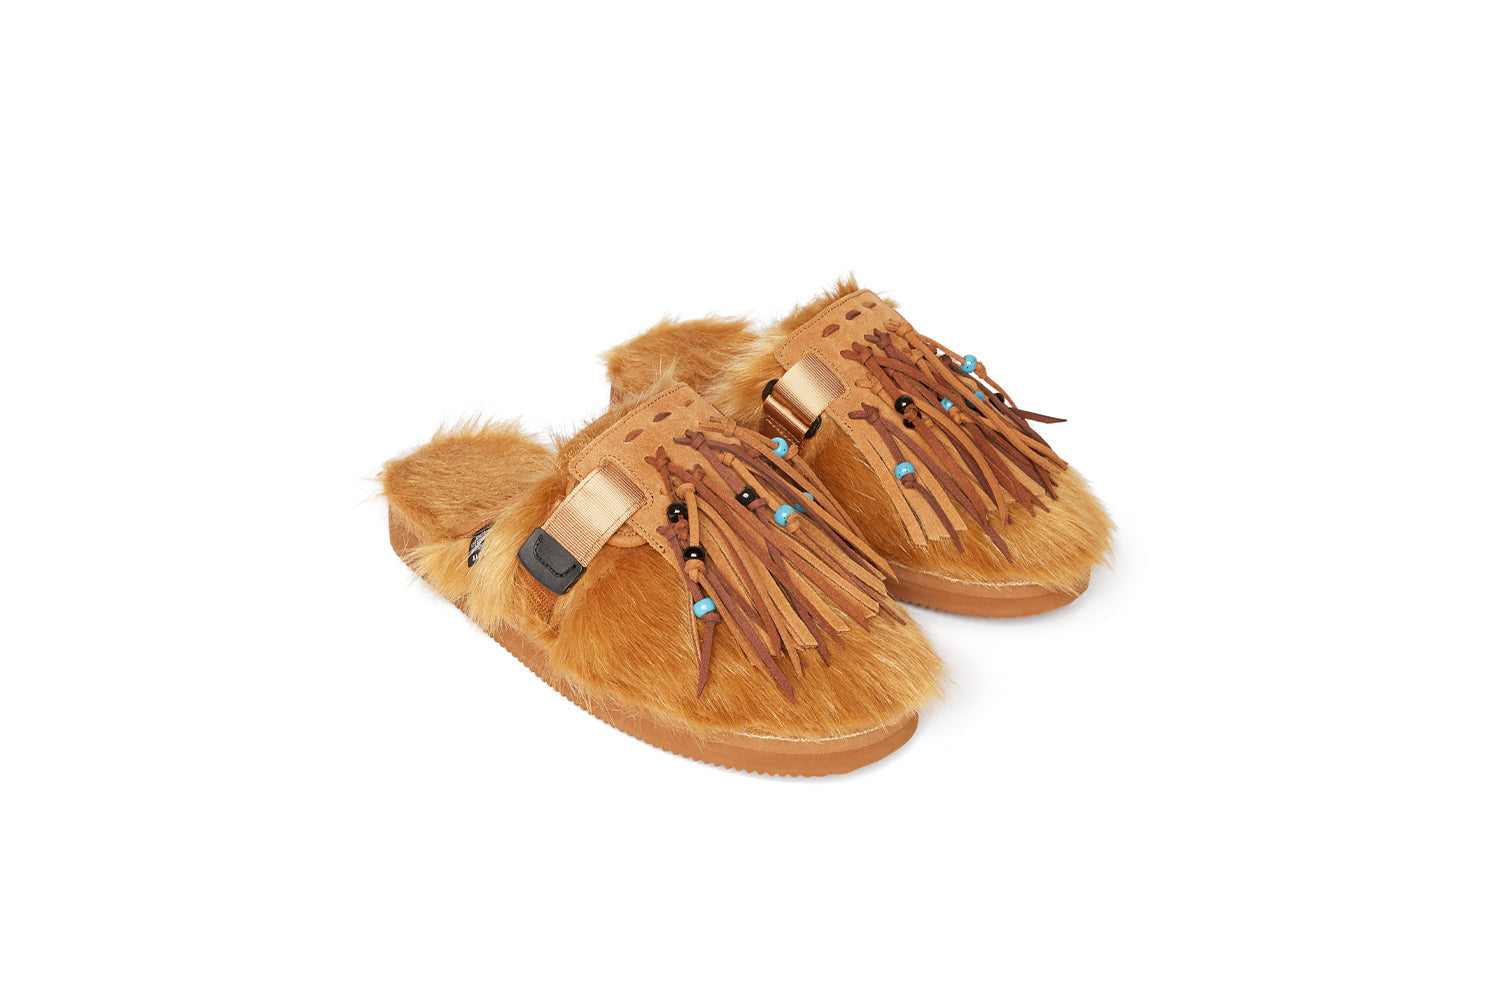 Alanui edition SUICOKE Zavo closed toe slides with camel colored fur on the upper and footbed. Includes a dark and light brown suede-beaded fringe that is a detachable piece from the singular nylon strap across the upper. From Fall/Winter 2021 collection on SUICOKE Official US &amp; Canada Webstore.